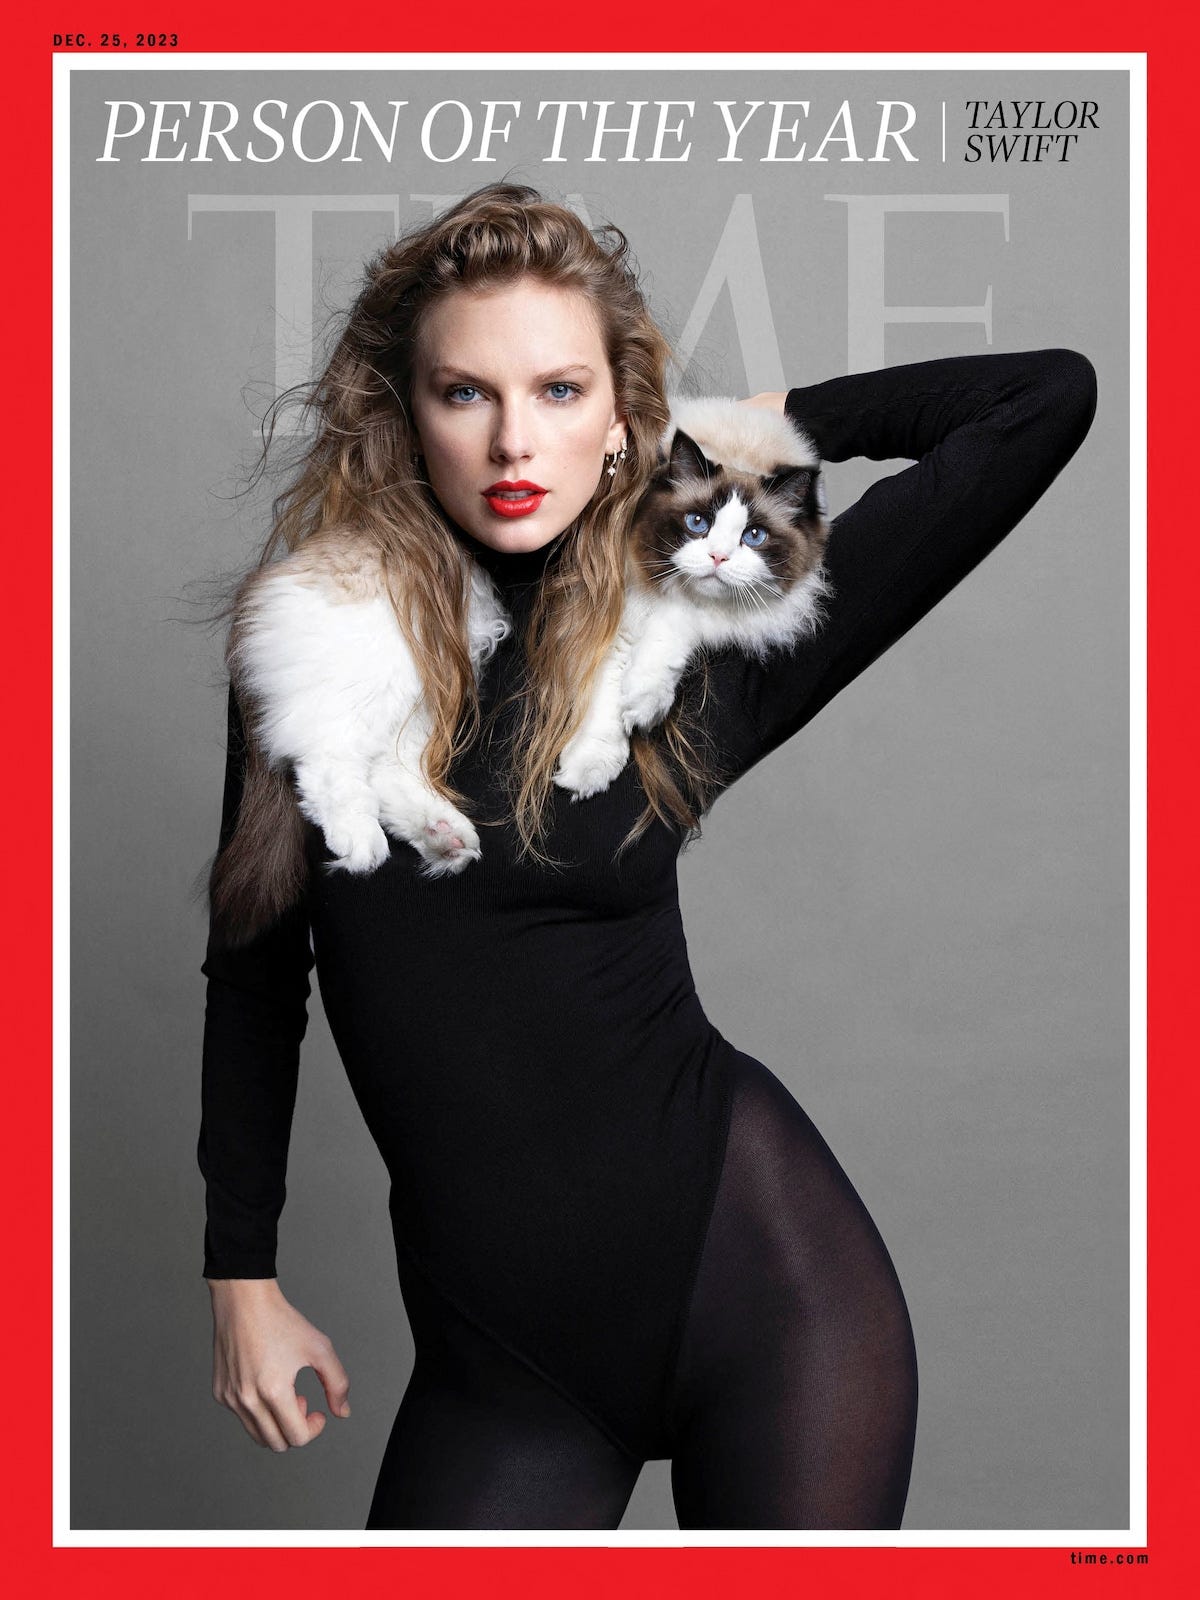 Taylor Swift named Time magazine's person of the year - The Washington Post